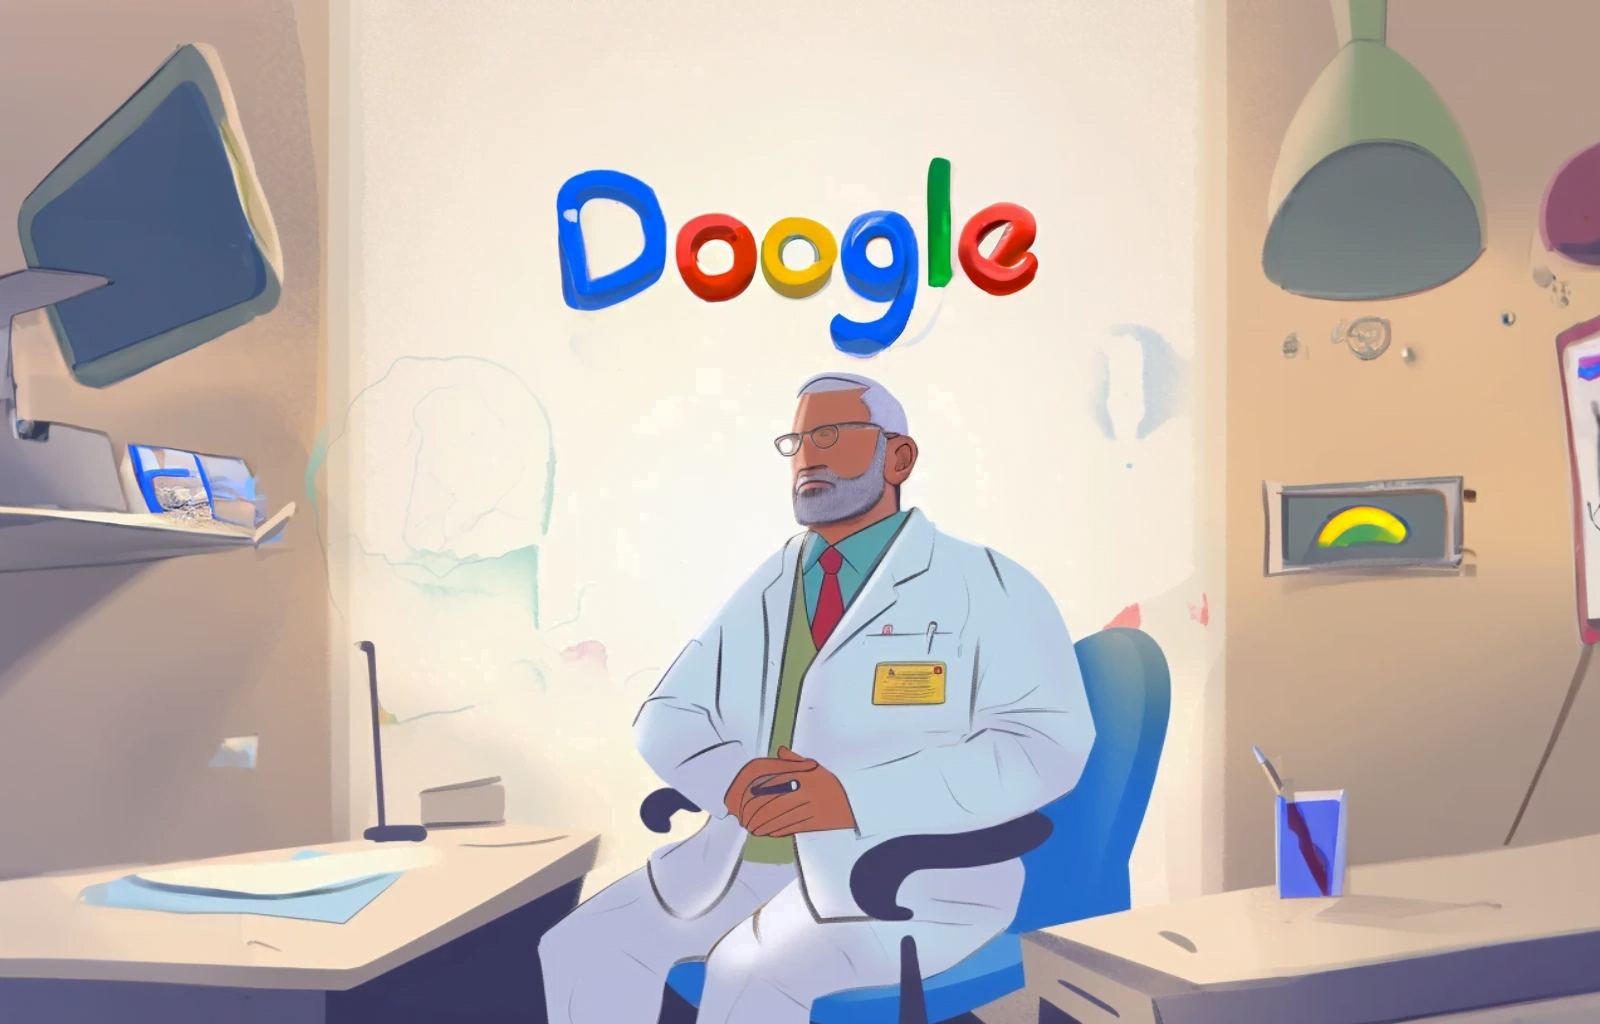 Google’s medical language model Med-PaLM 2 passes exam questions